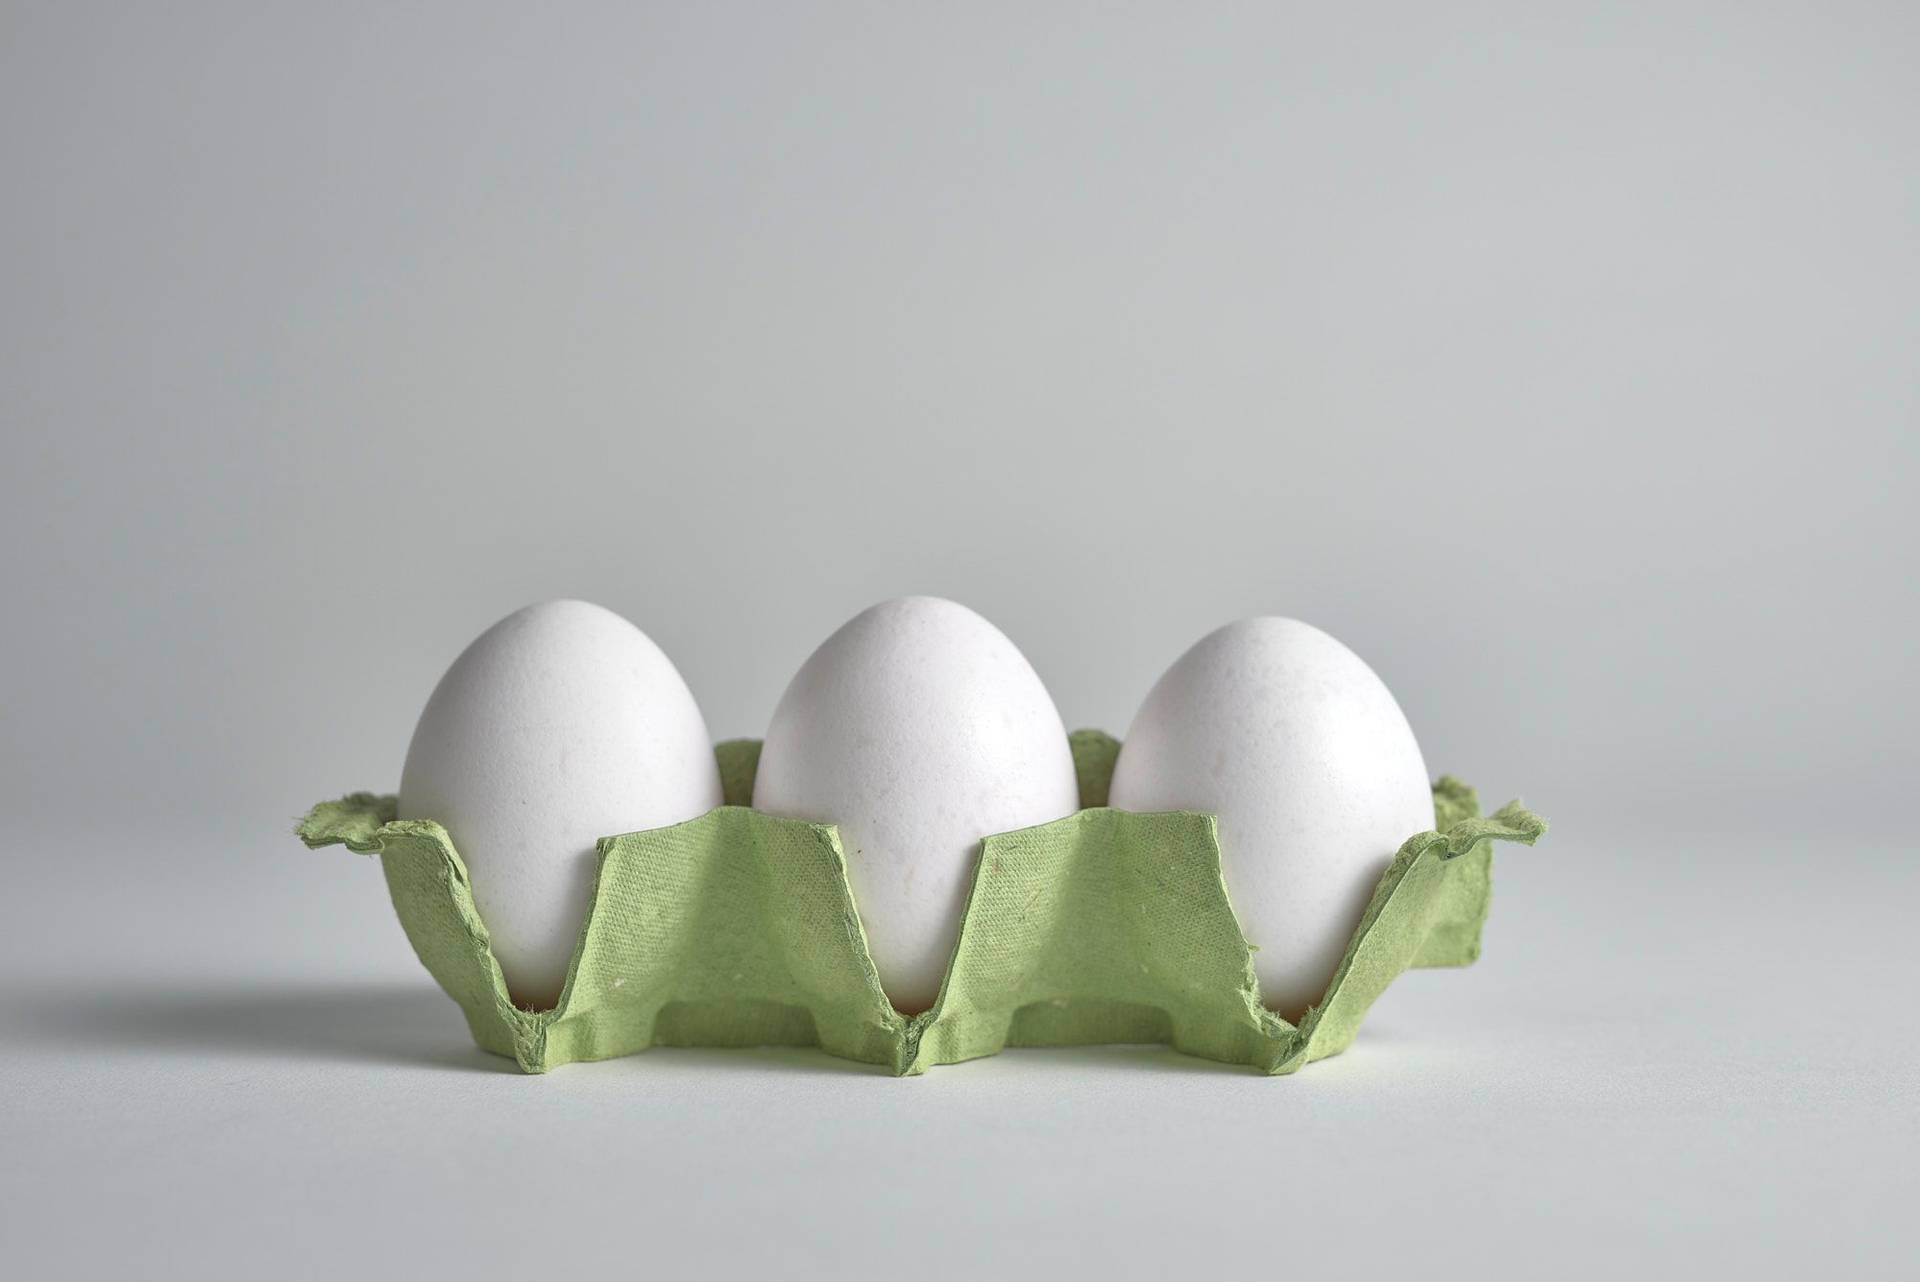 three white eggs in a green carton with white background